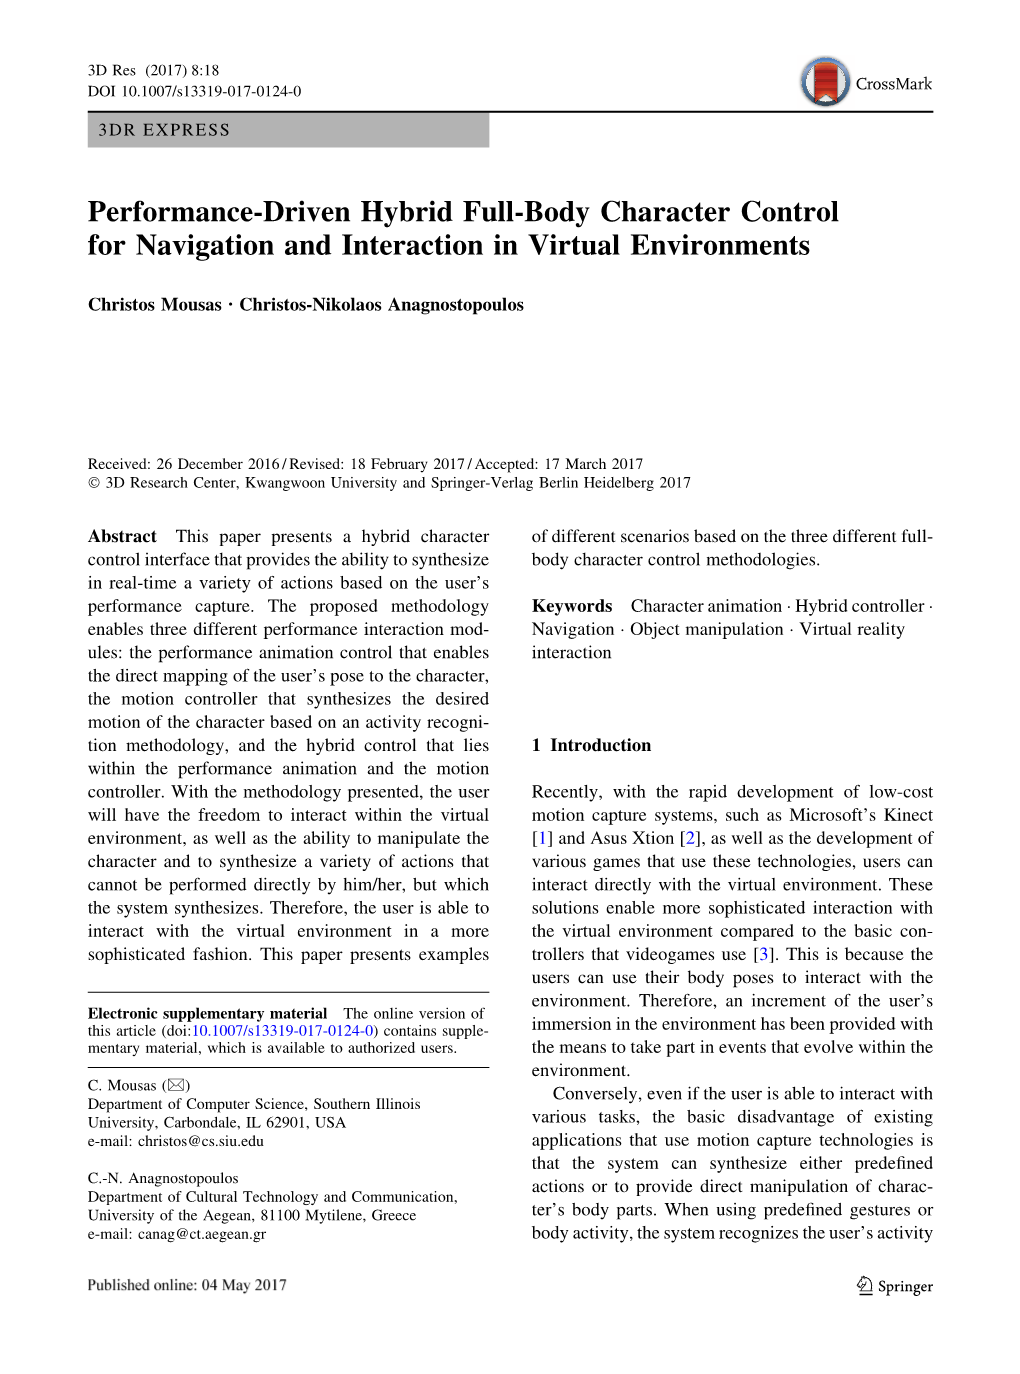 Performance-Driven Hybrid Full-Body Character Control for Navigation and Interaction in Virtual Environments